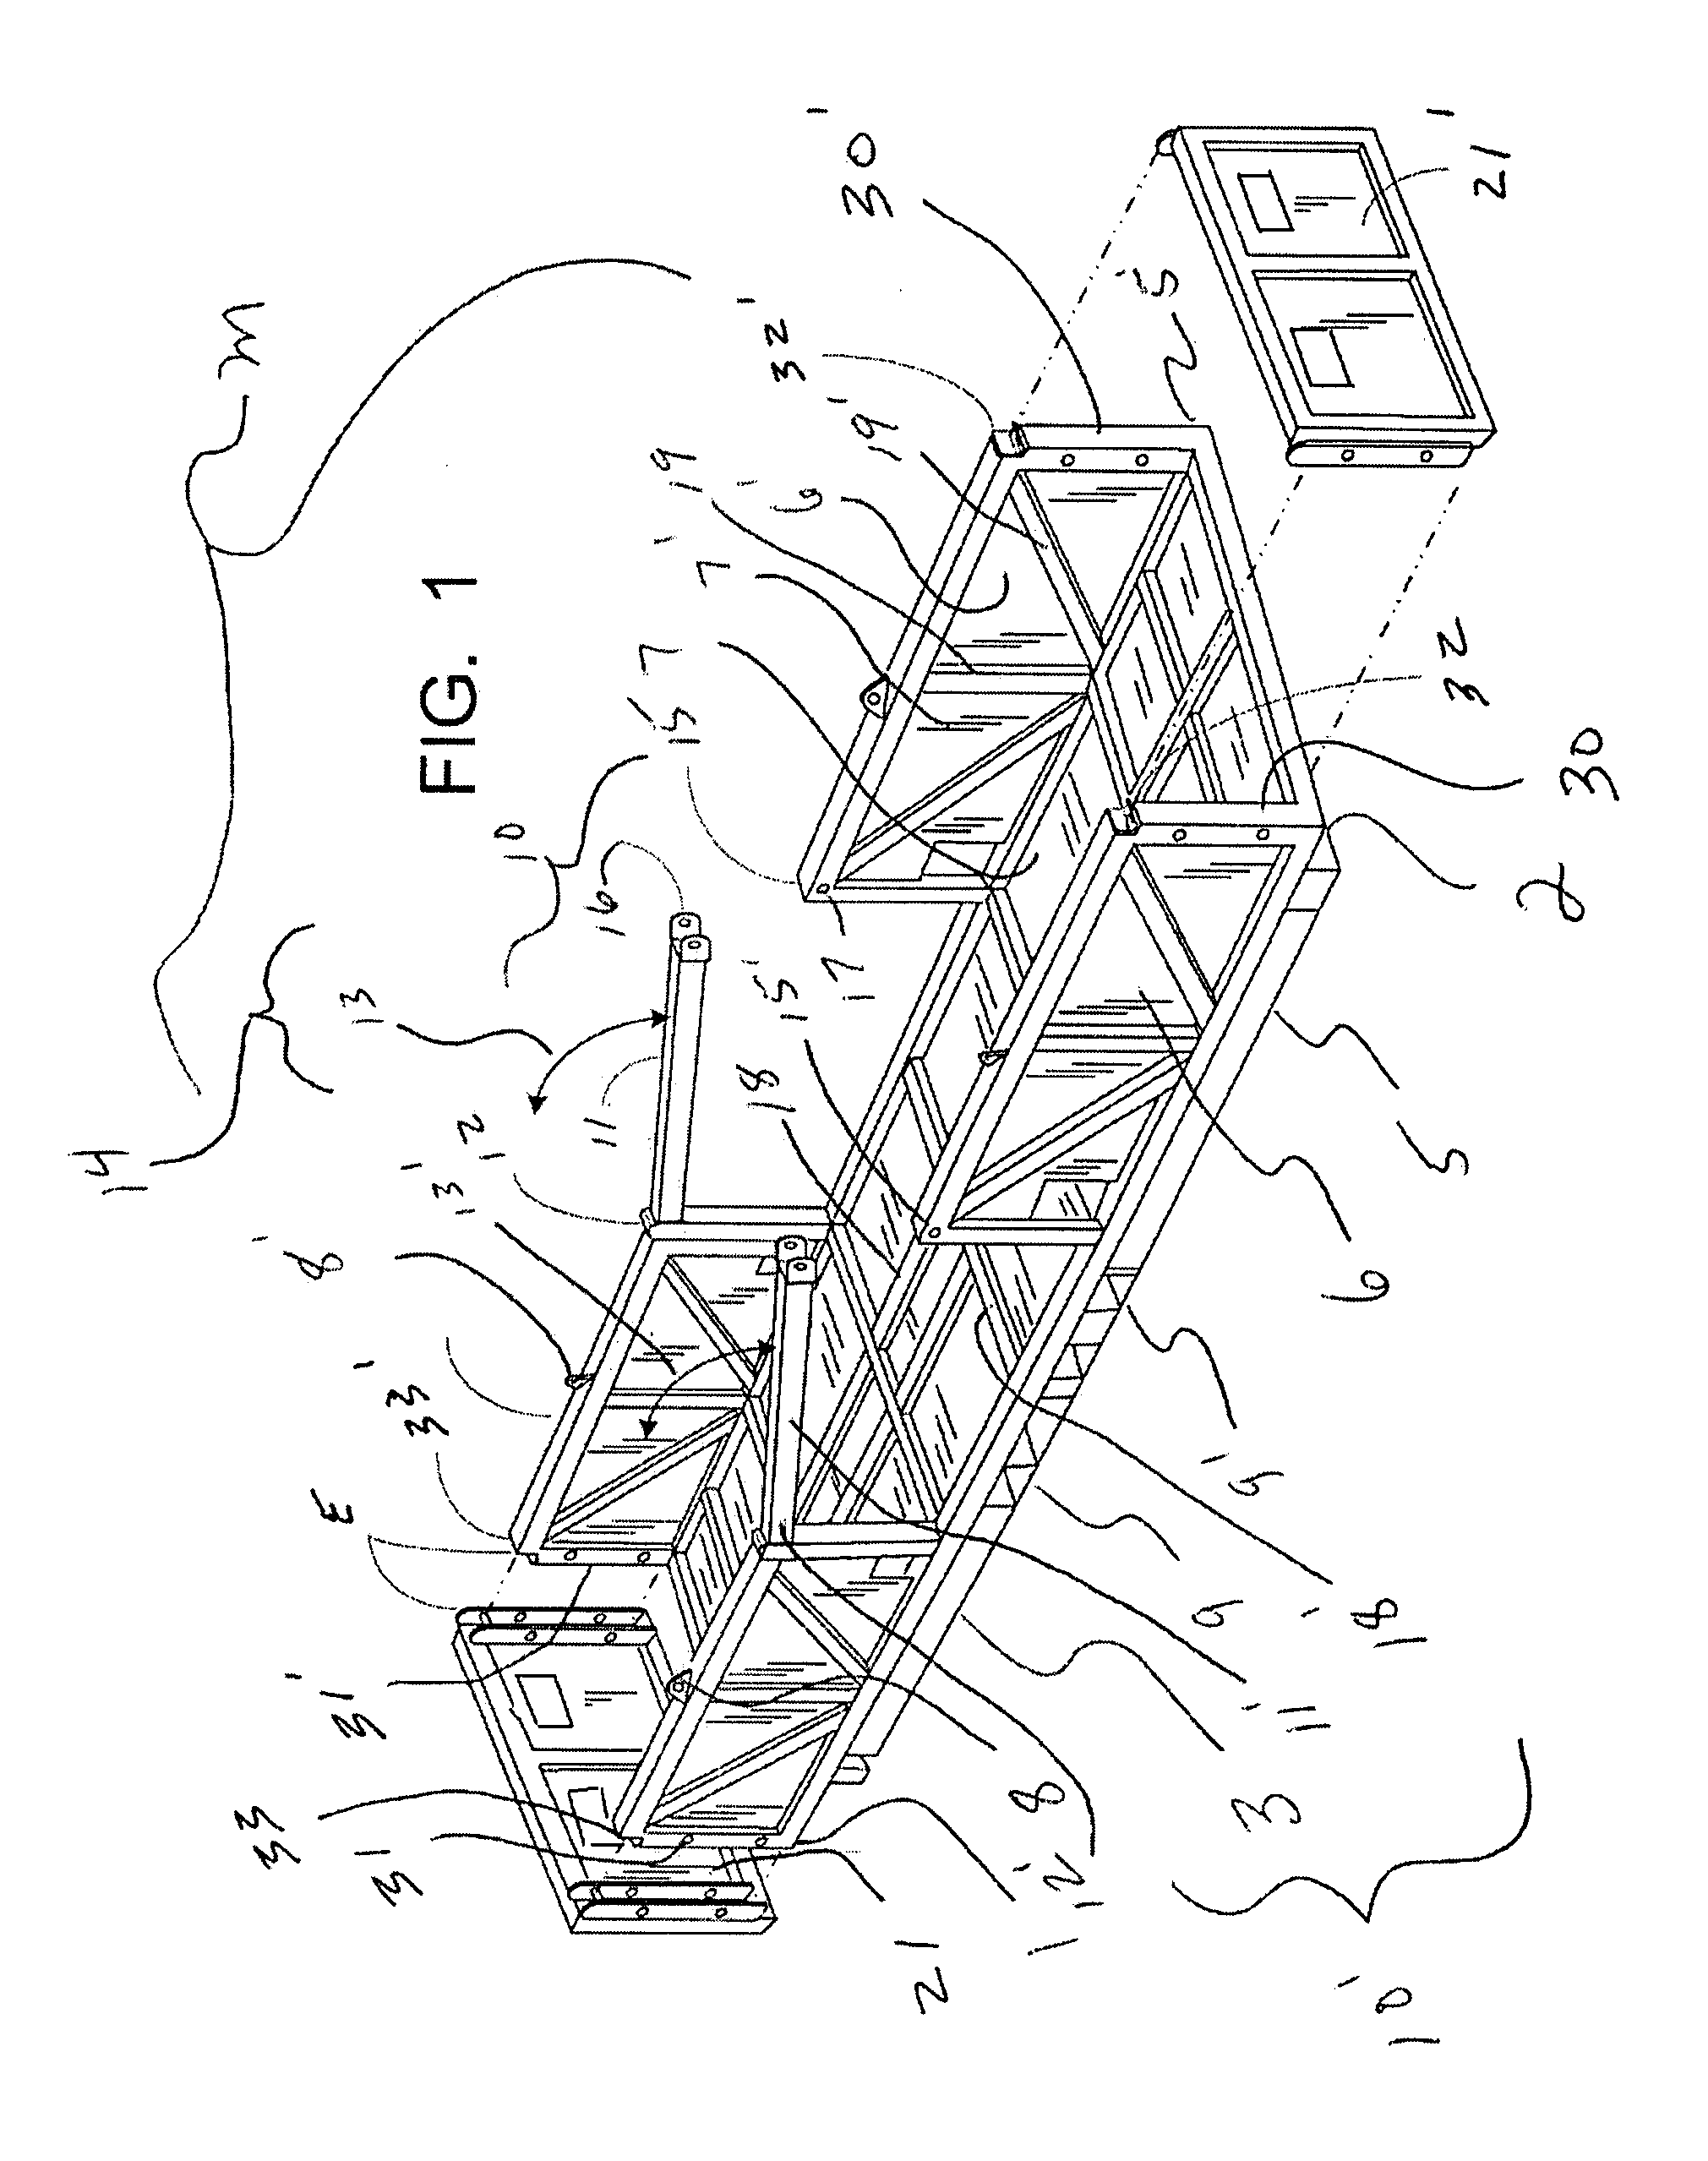 Extendable Cargo System and Method Therefore